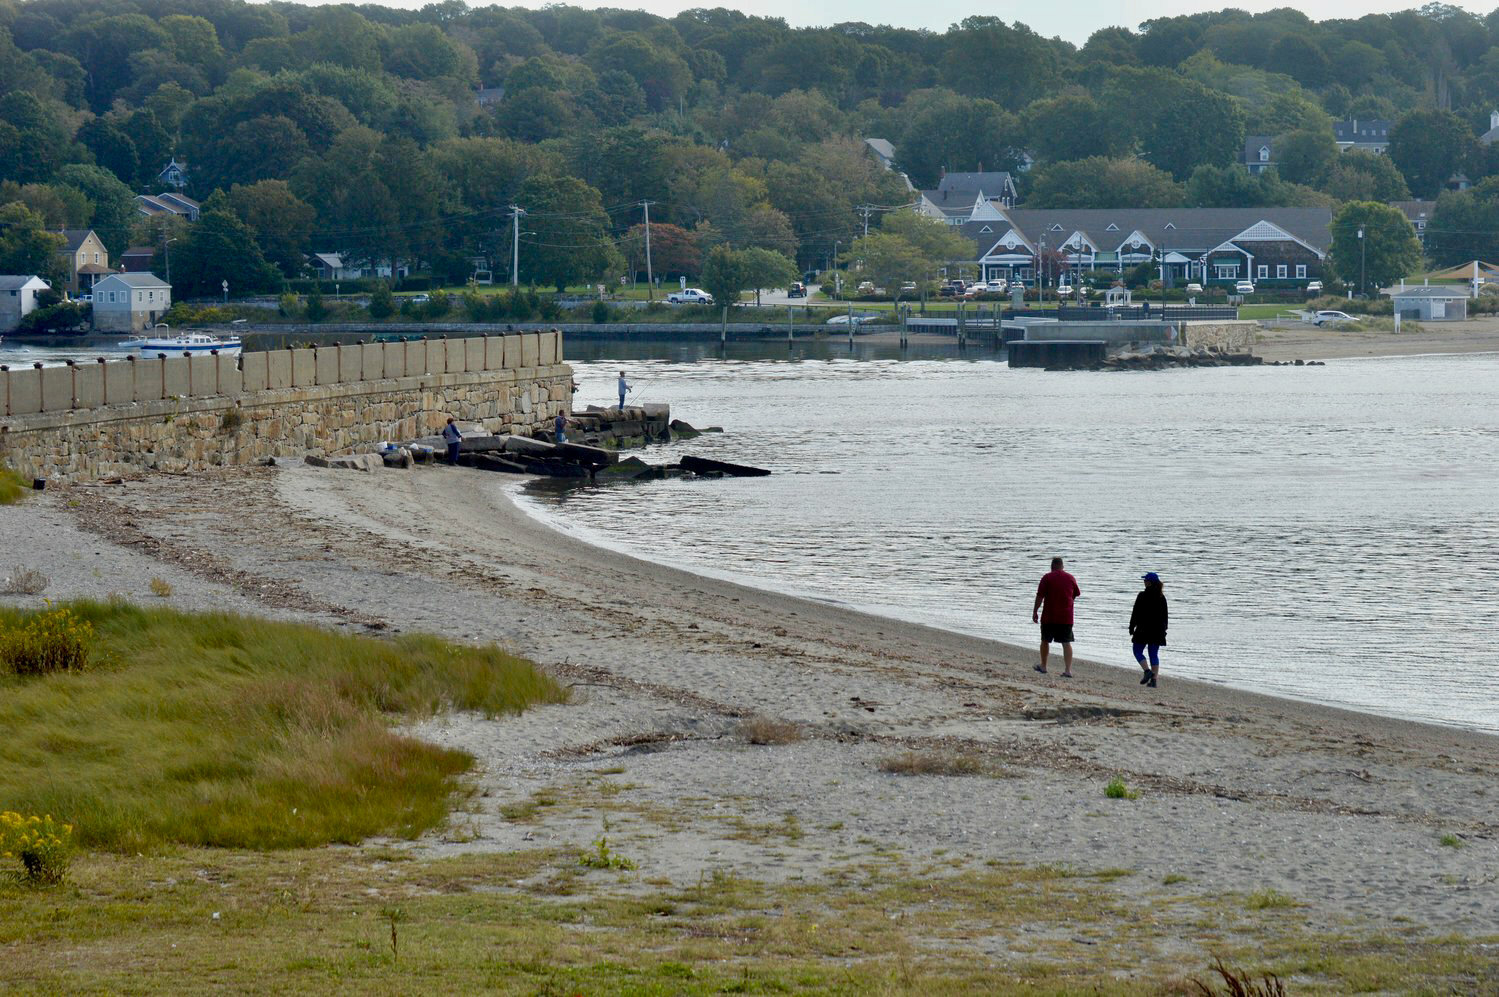 The Town of Portsmouth won’t sign a purchase-and-sales agreement with the state for the Old Stone Bridge abutment and Teddi’s Beach, while RIDOT won’t allow access to the abutment without the town’s signature.